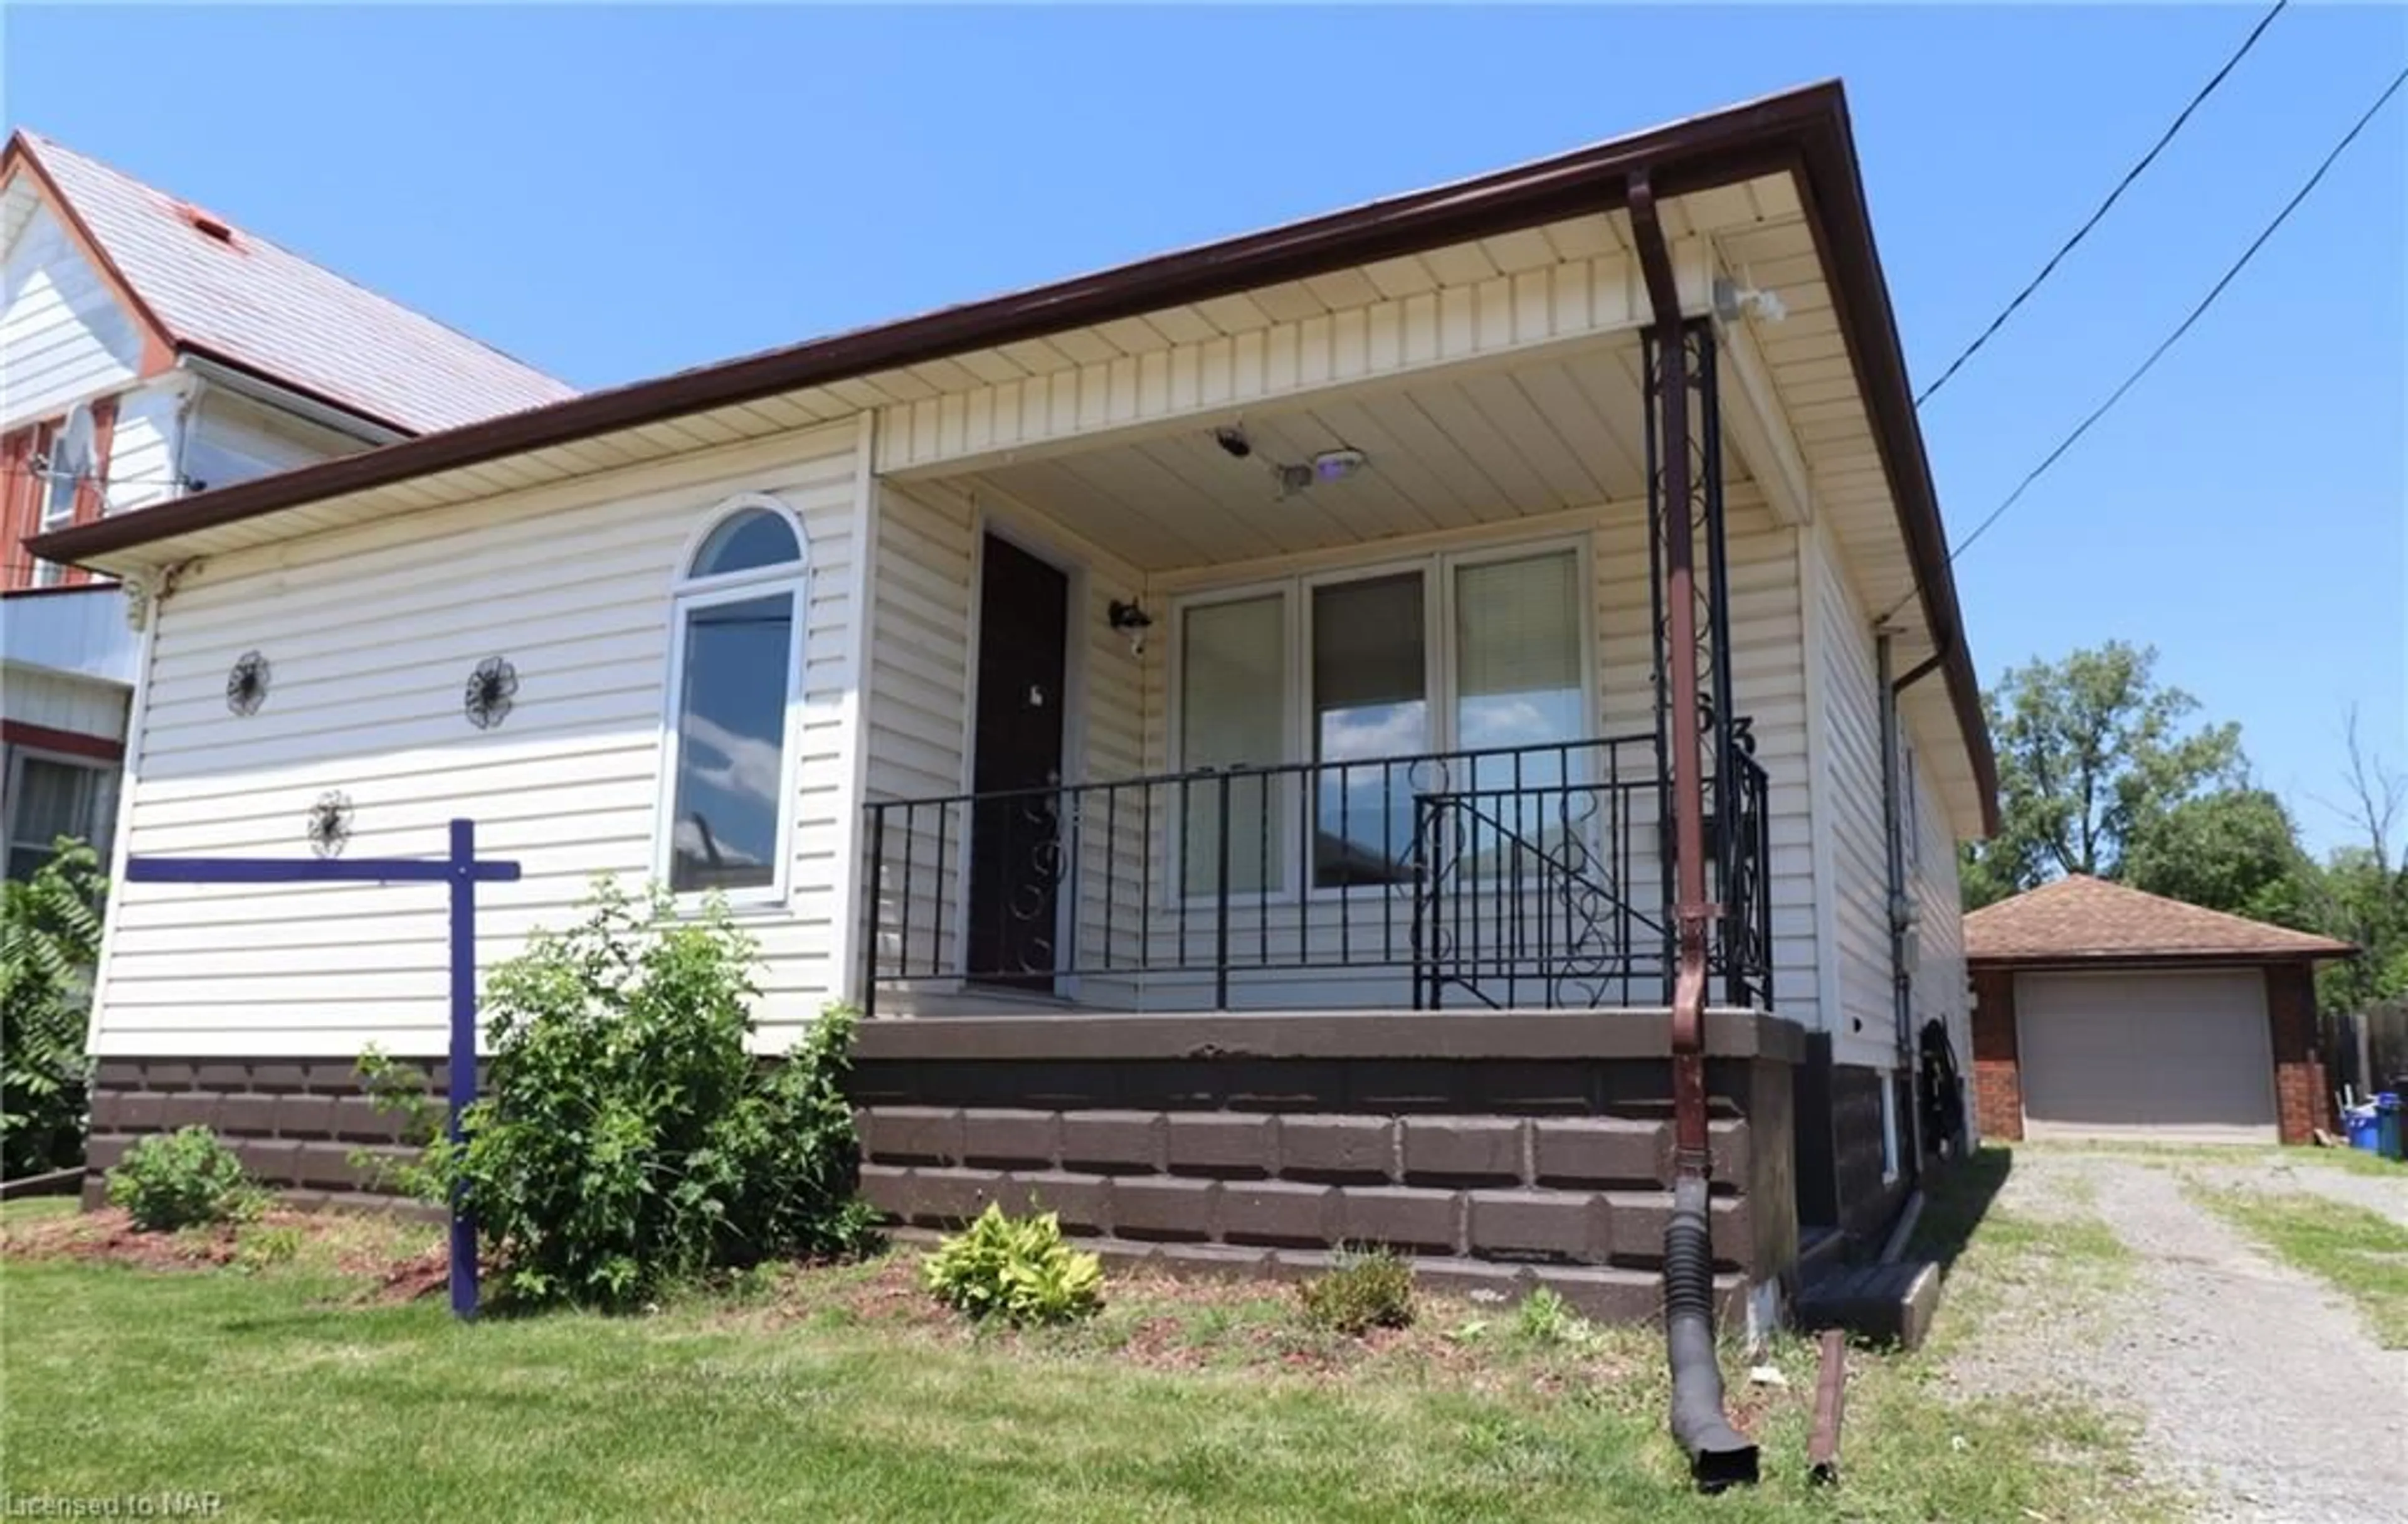 Frontside or backside of a home for 163 Broadway St, Welland Ontario L3C 5L6